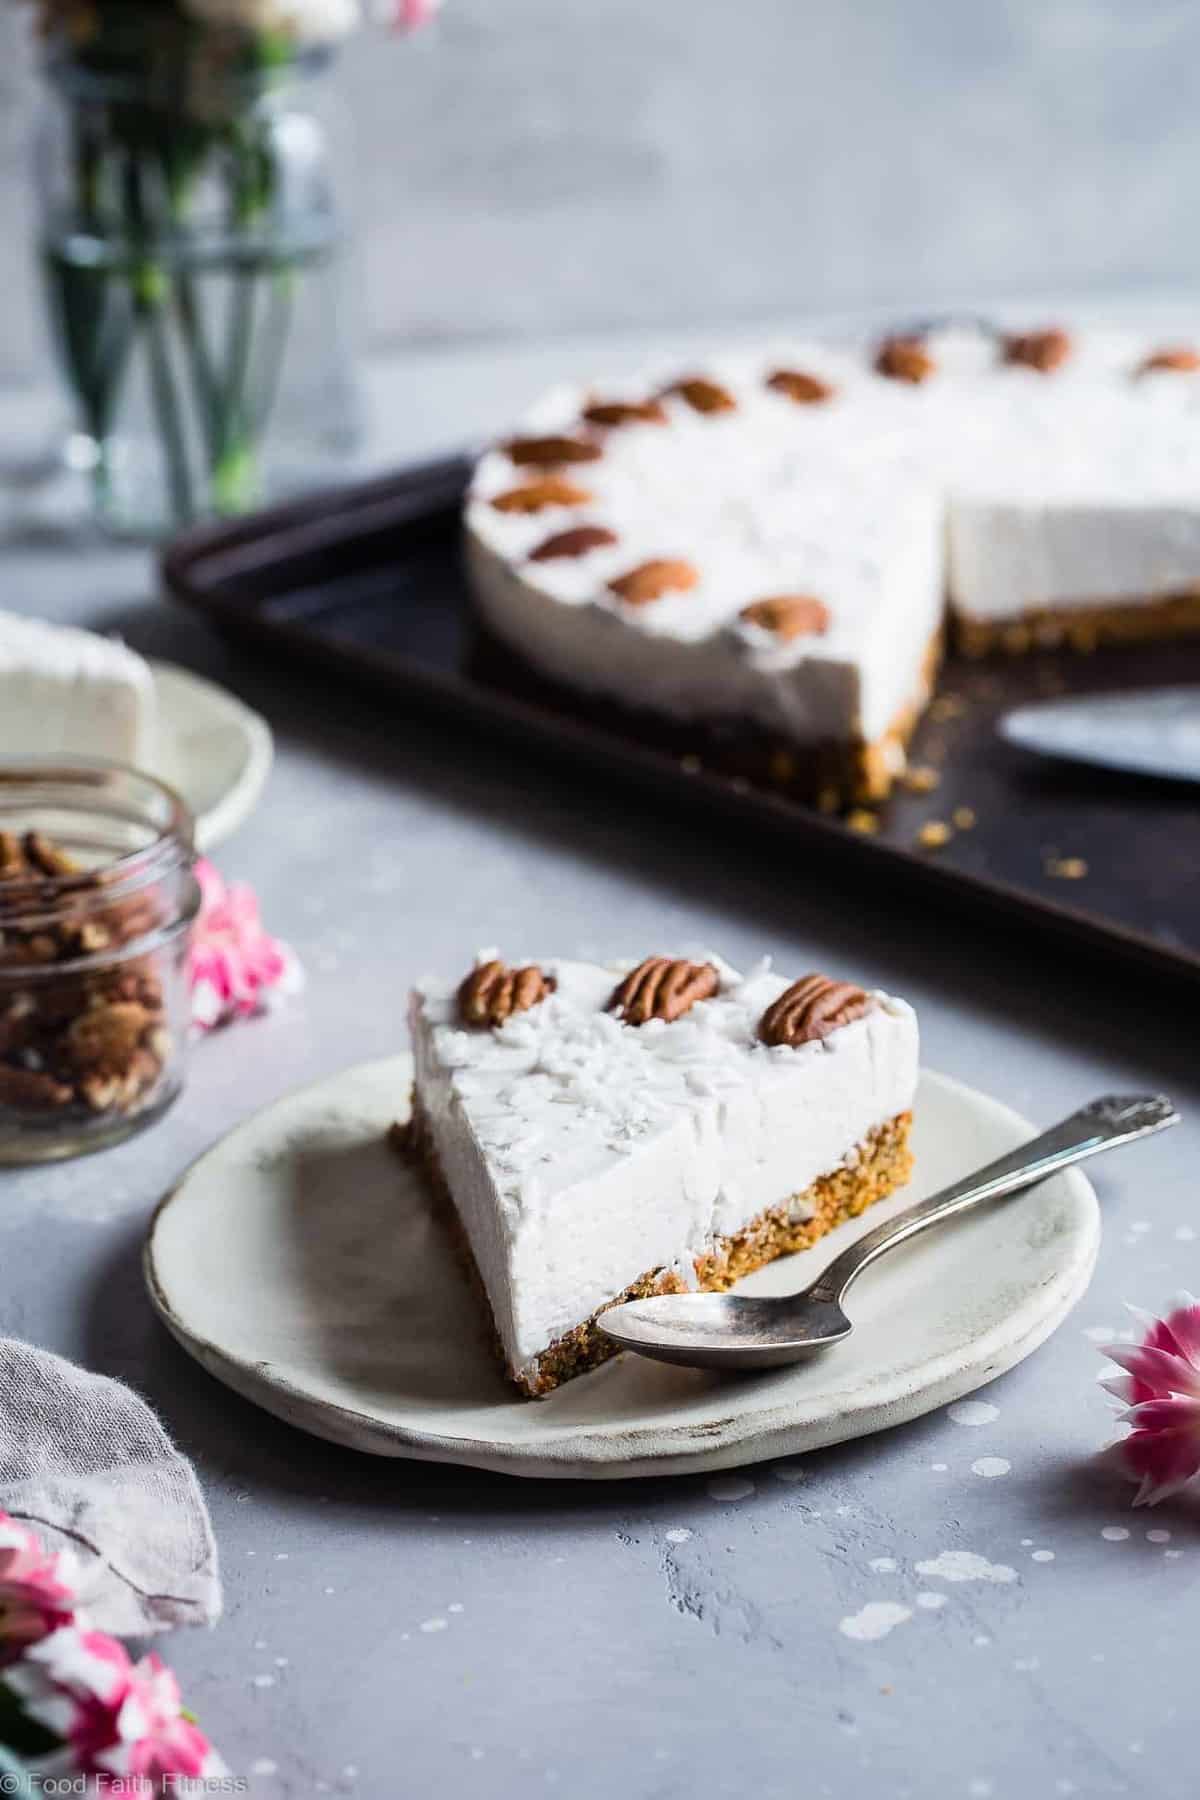  Gluten Free Dairy Free Carrot Cake Cheesecake - This easy cake has a healthy carrot cake bottom and a no-bake, dairy and no sugar added cheesecake topping! Only 150 calories and perfect for Easter! | #Foodfaithfitness | #Glutenfree #Dairyfree #Sugarfree #Carrotcake #Easter